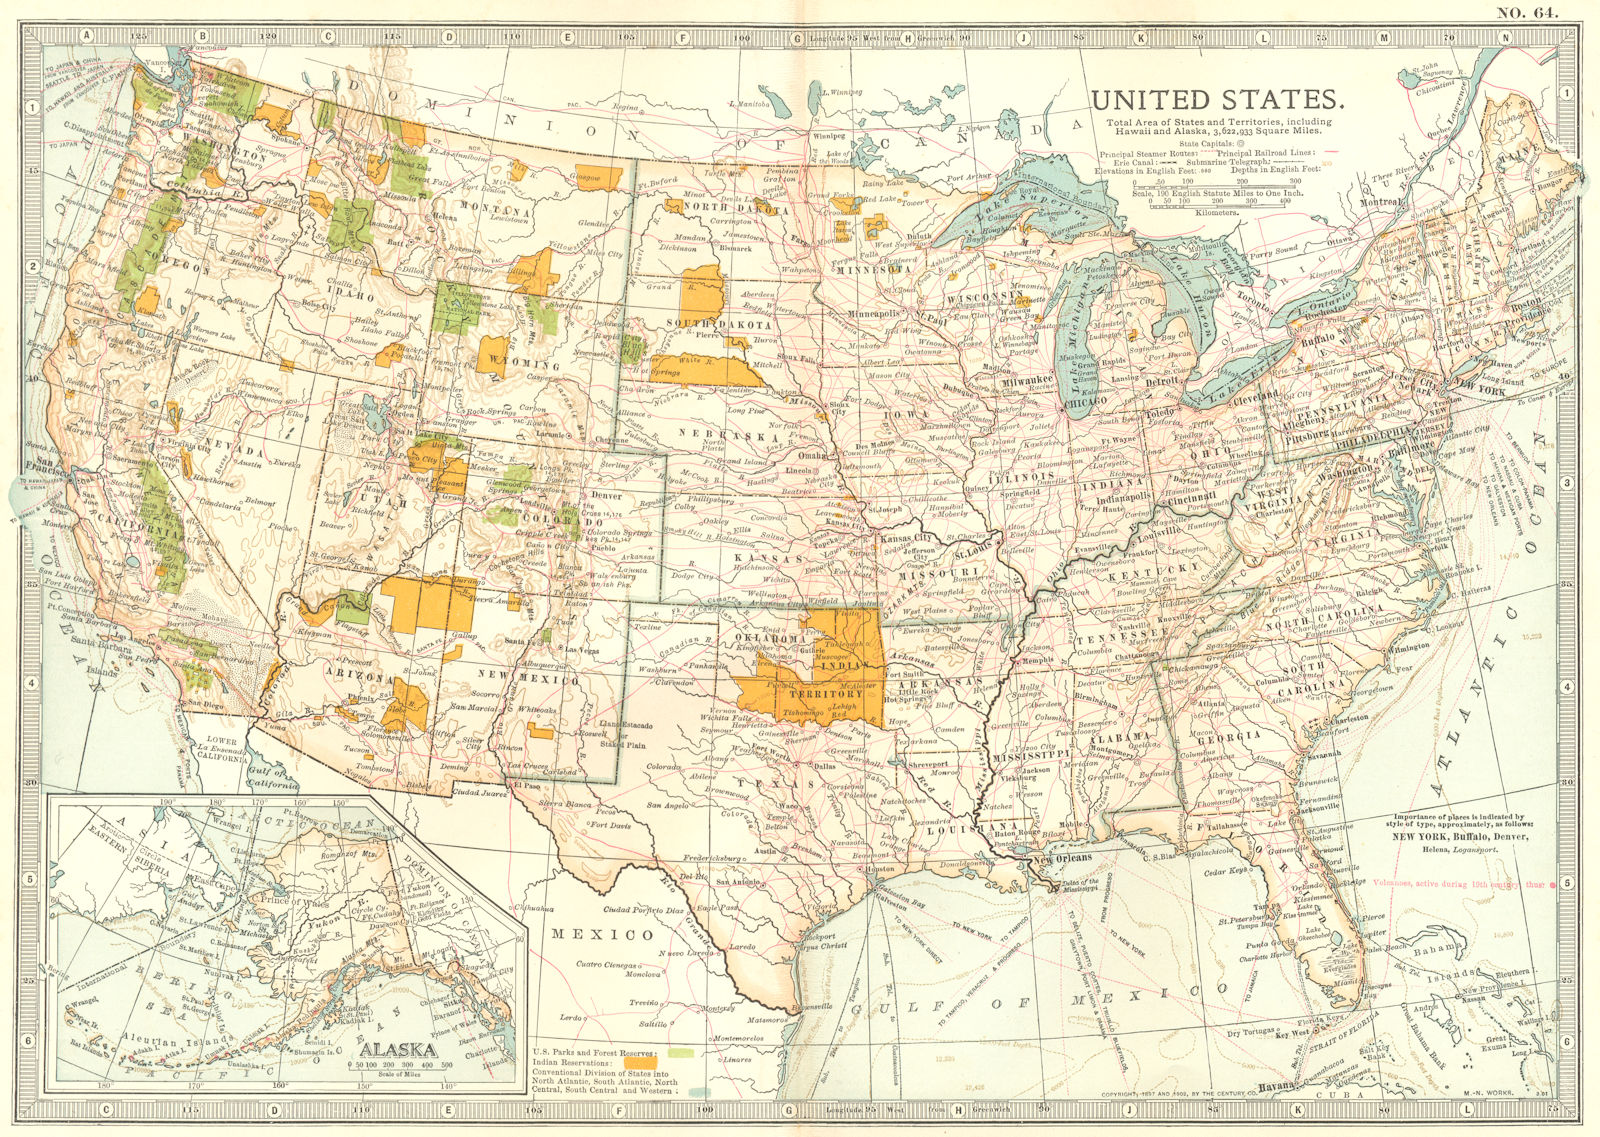 USA. United States showing Indian reserves, national park & forests 1903 map